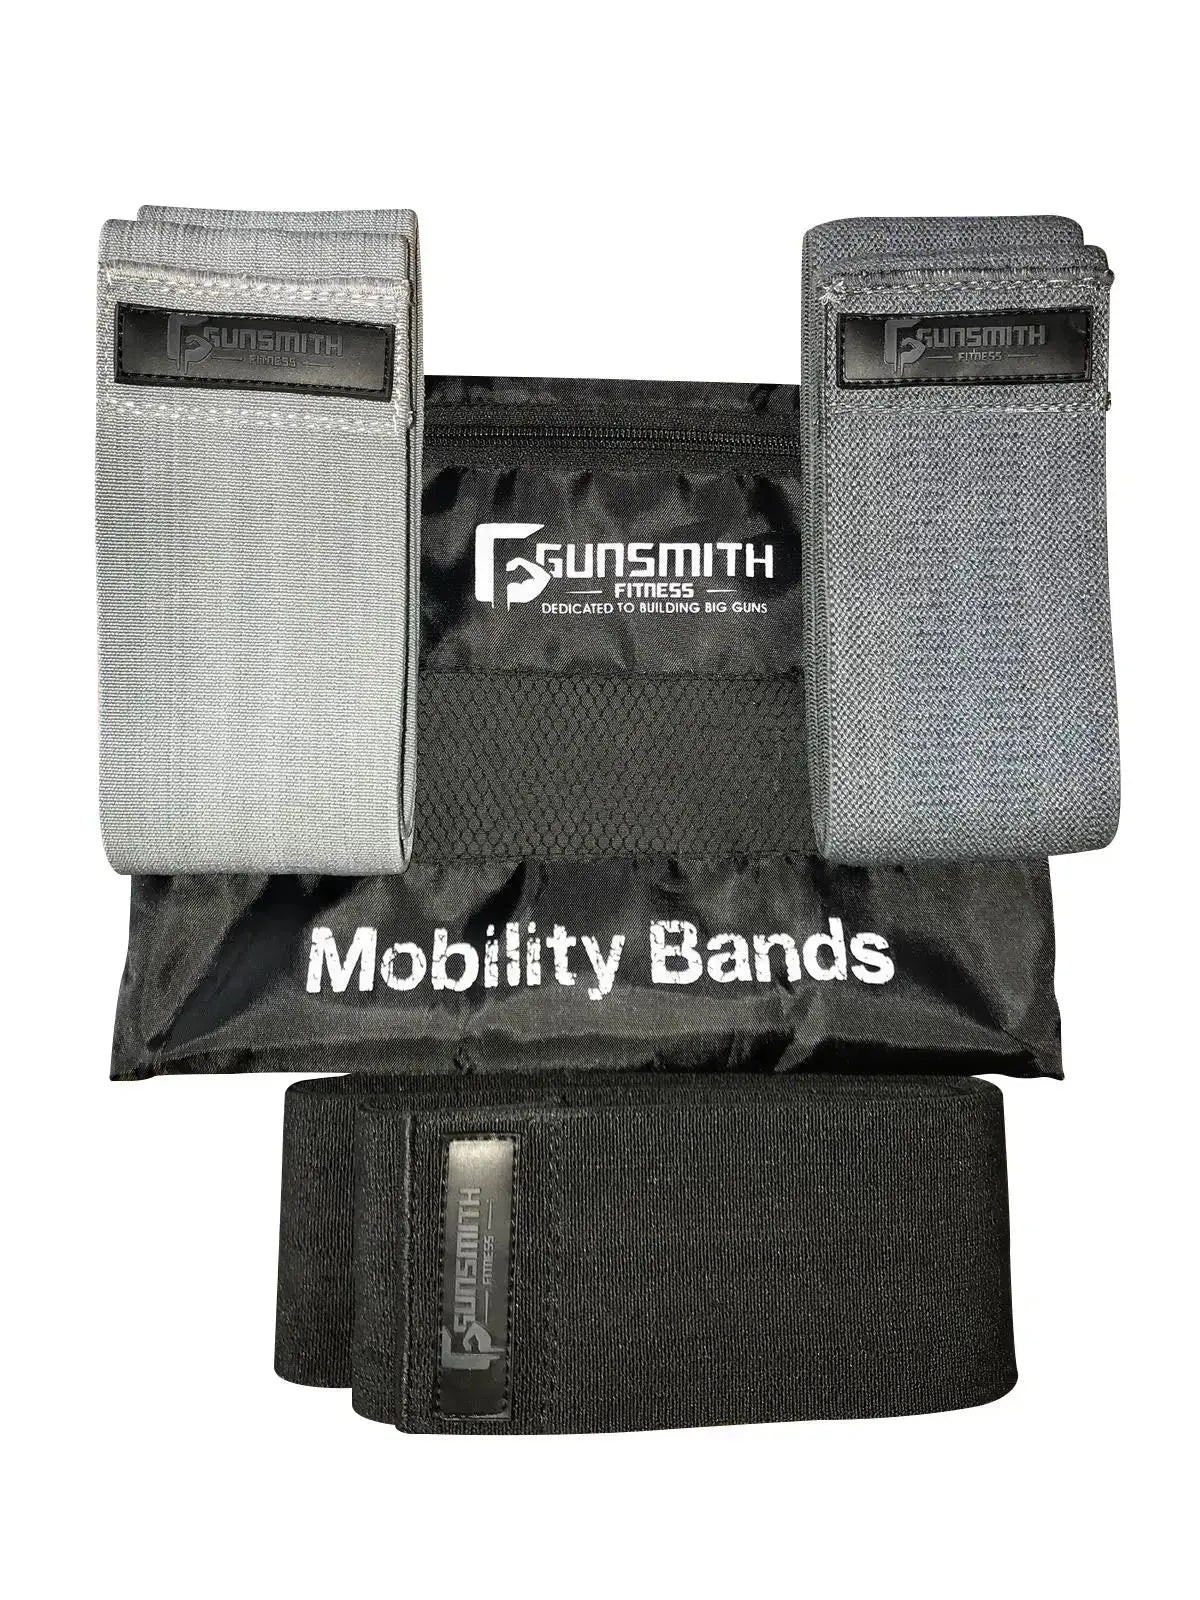 Clearance - Mobility/Glute Bands - Gunsmith Fitness